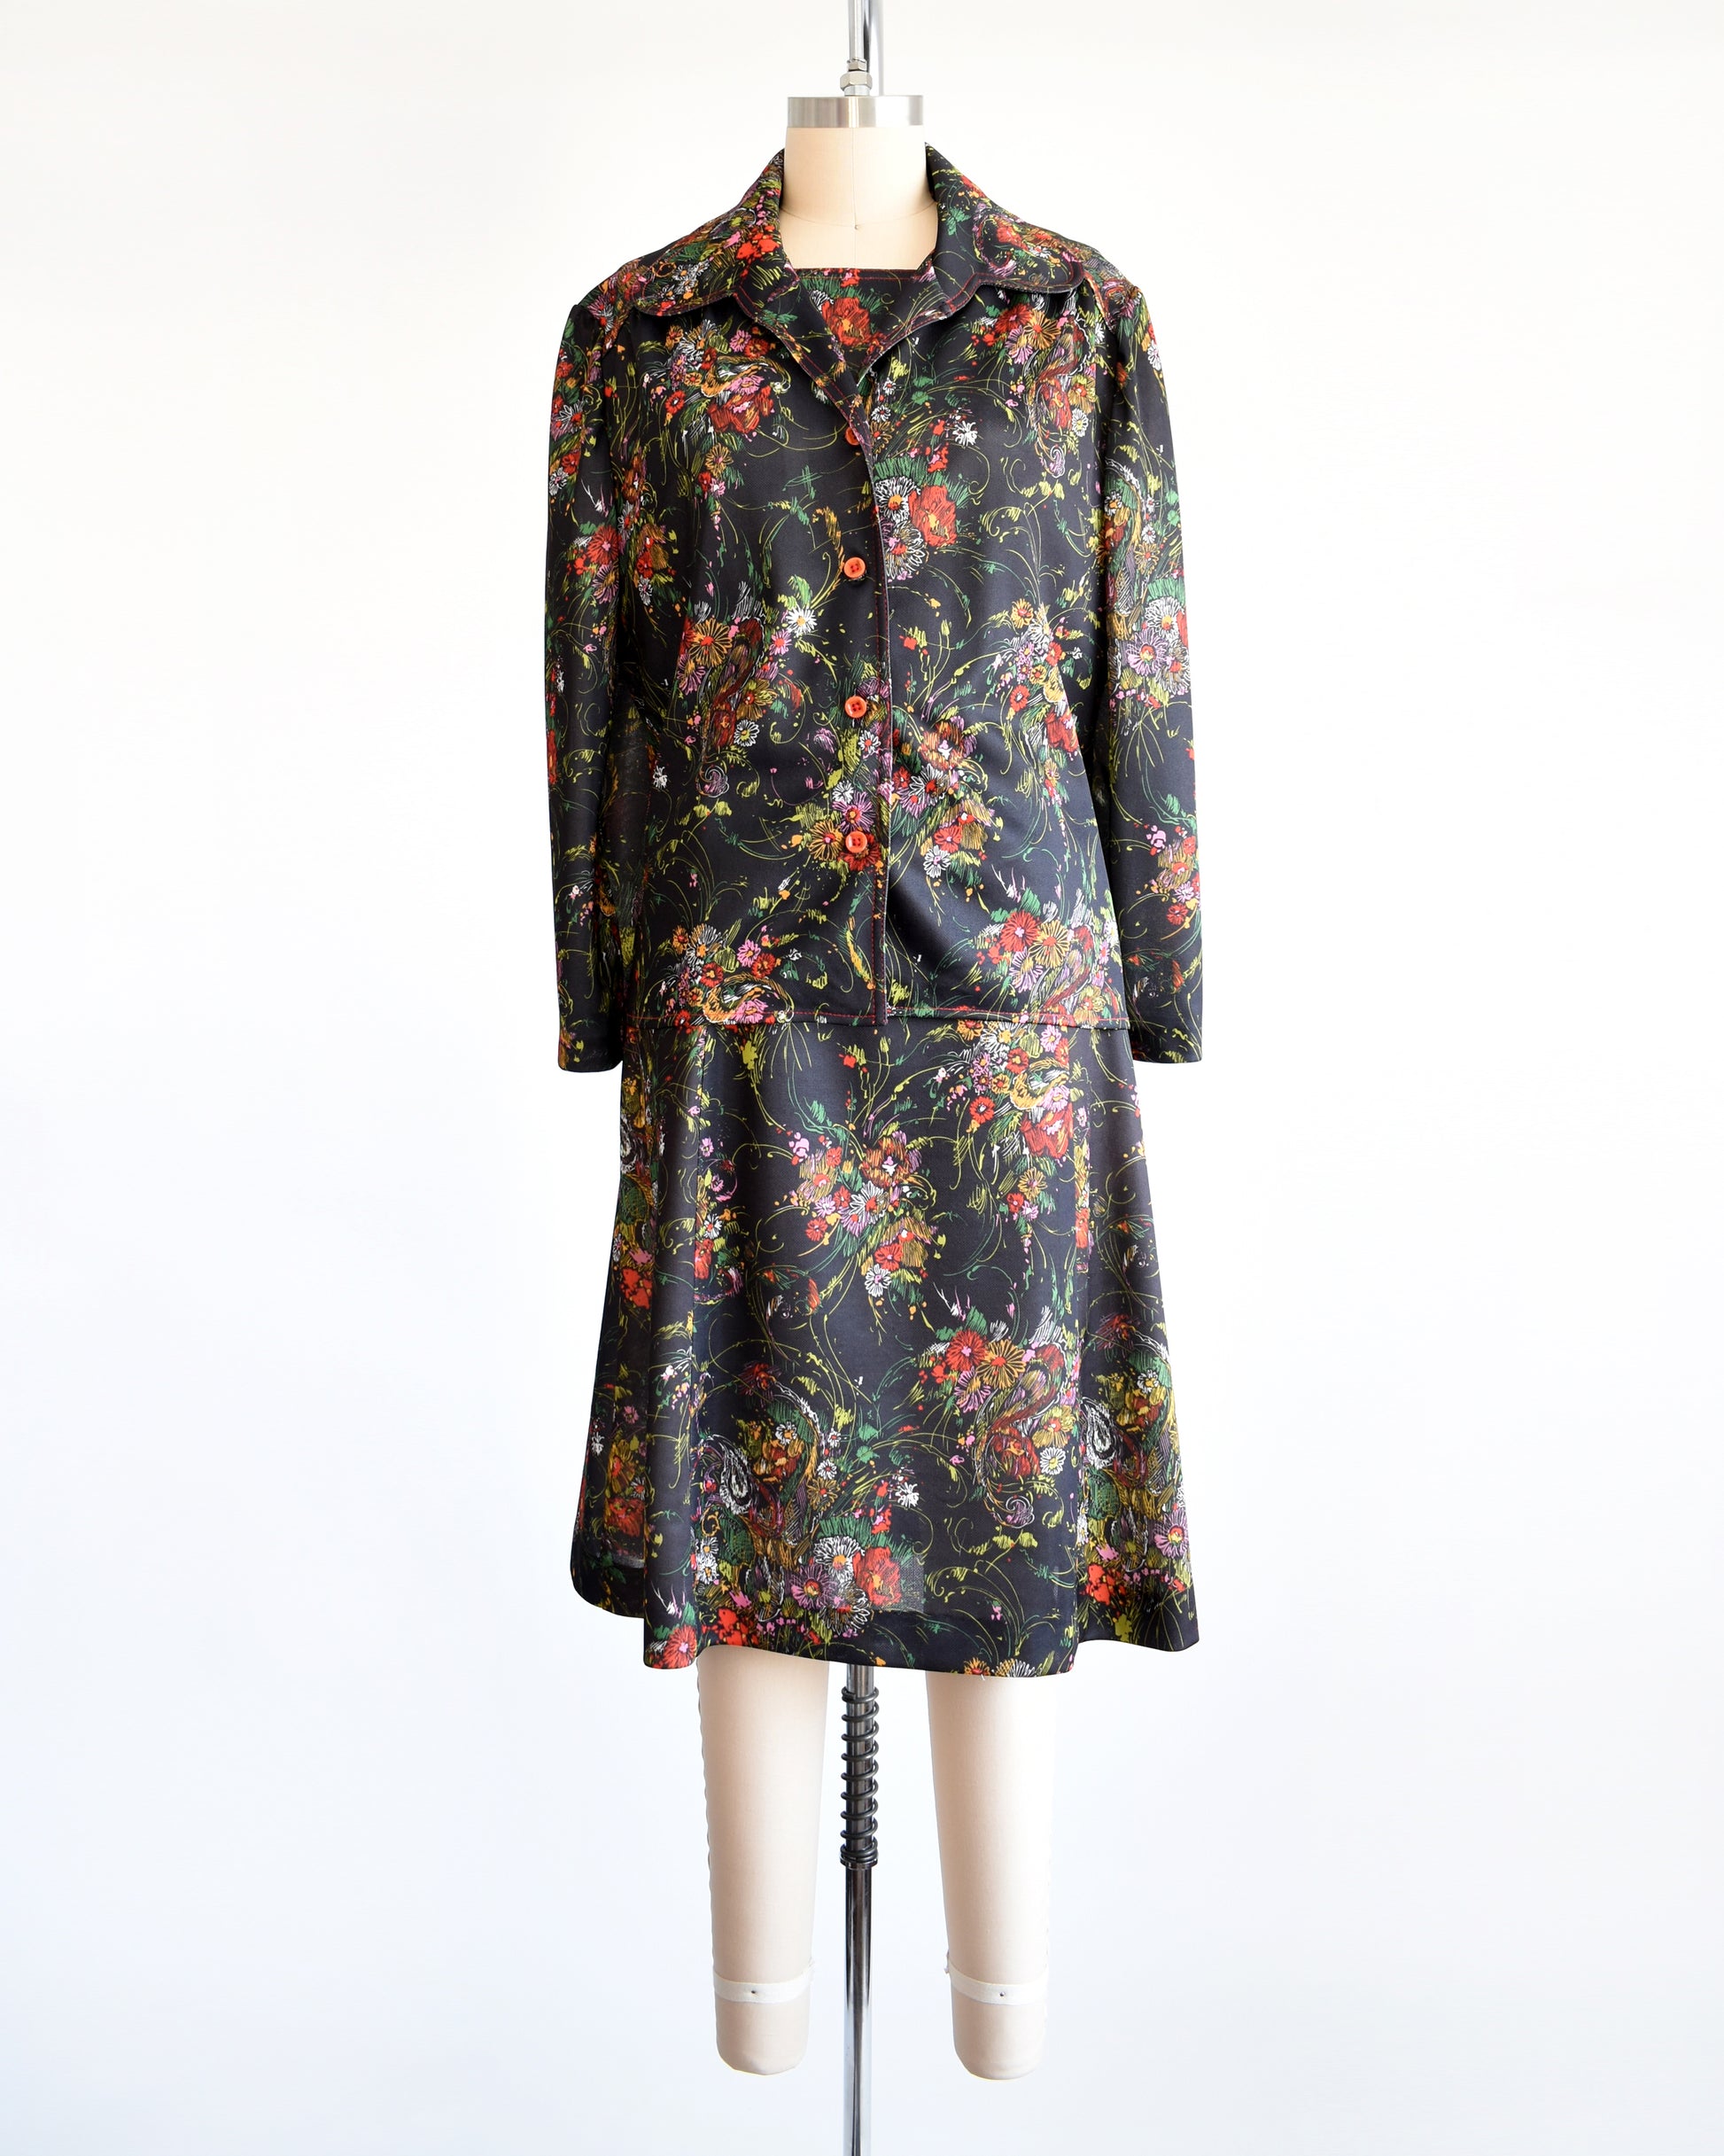 a vintage 1970s black floral dress set that comes with a dress and a matching top